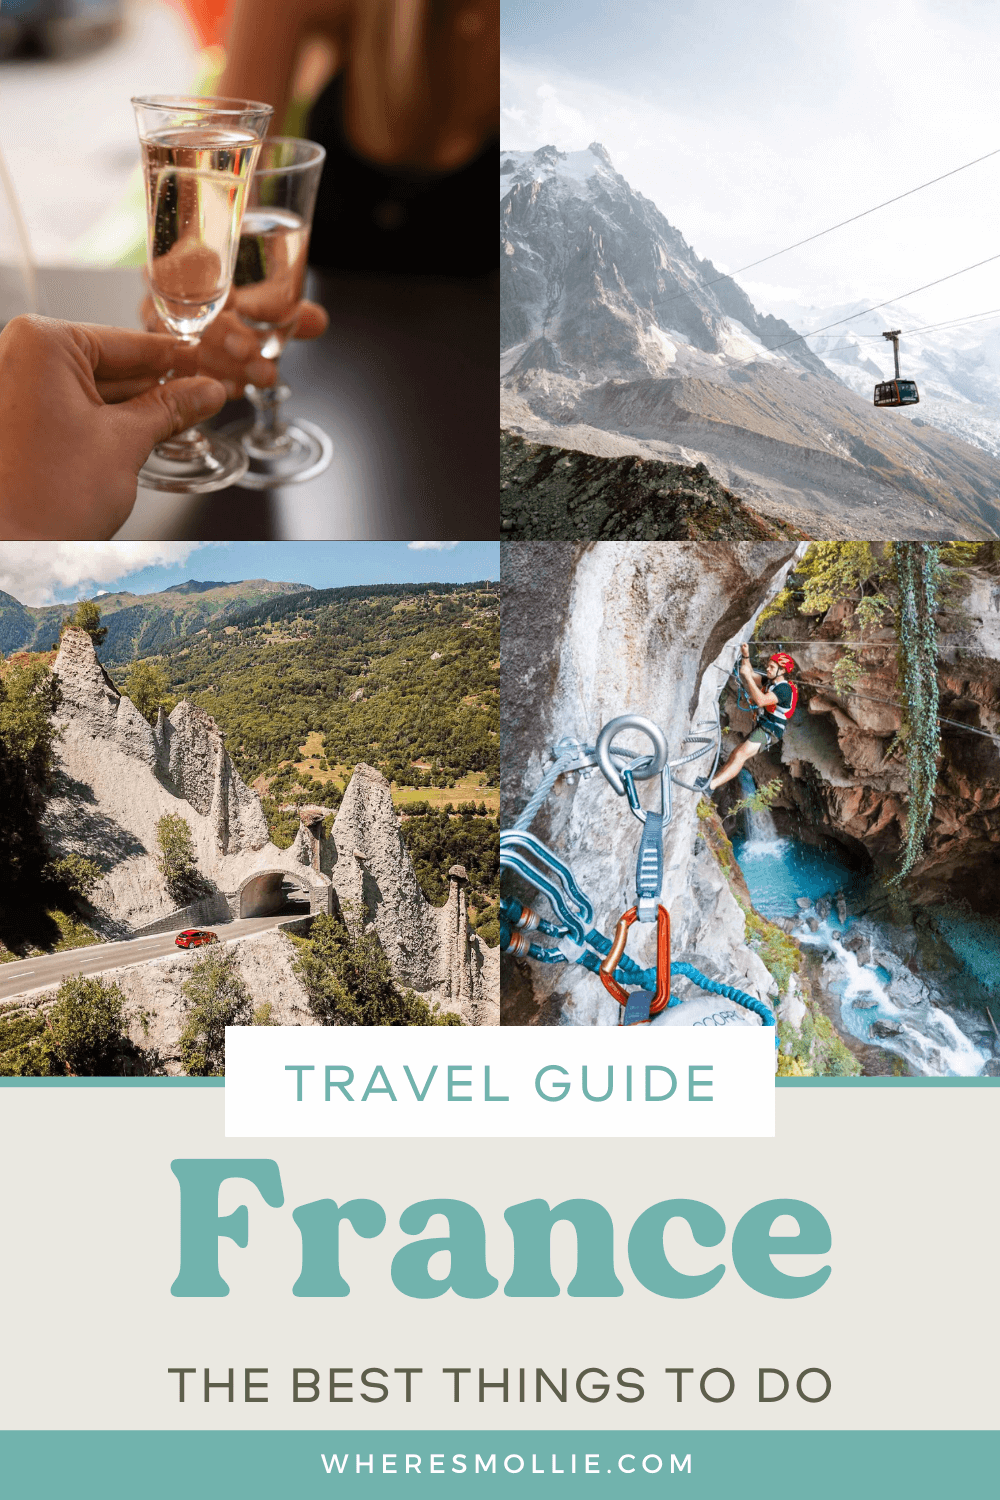 The best things to do in France